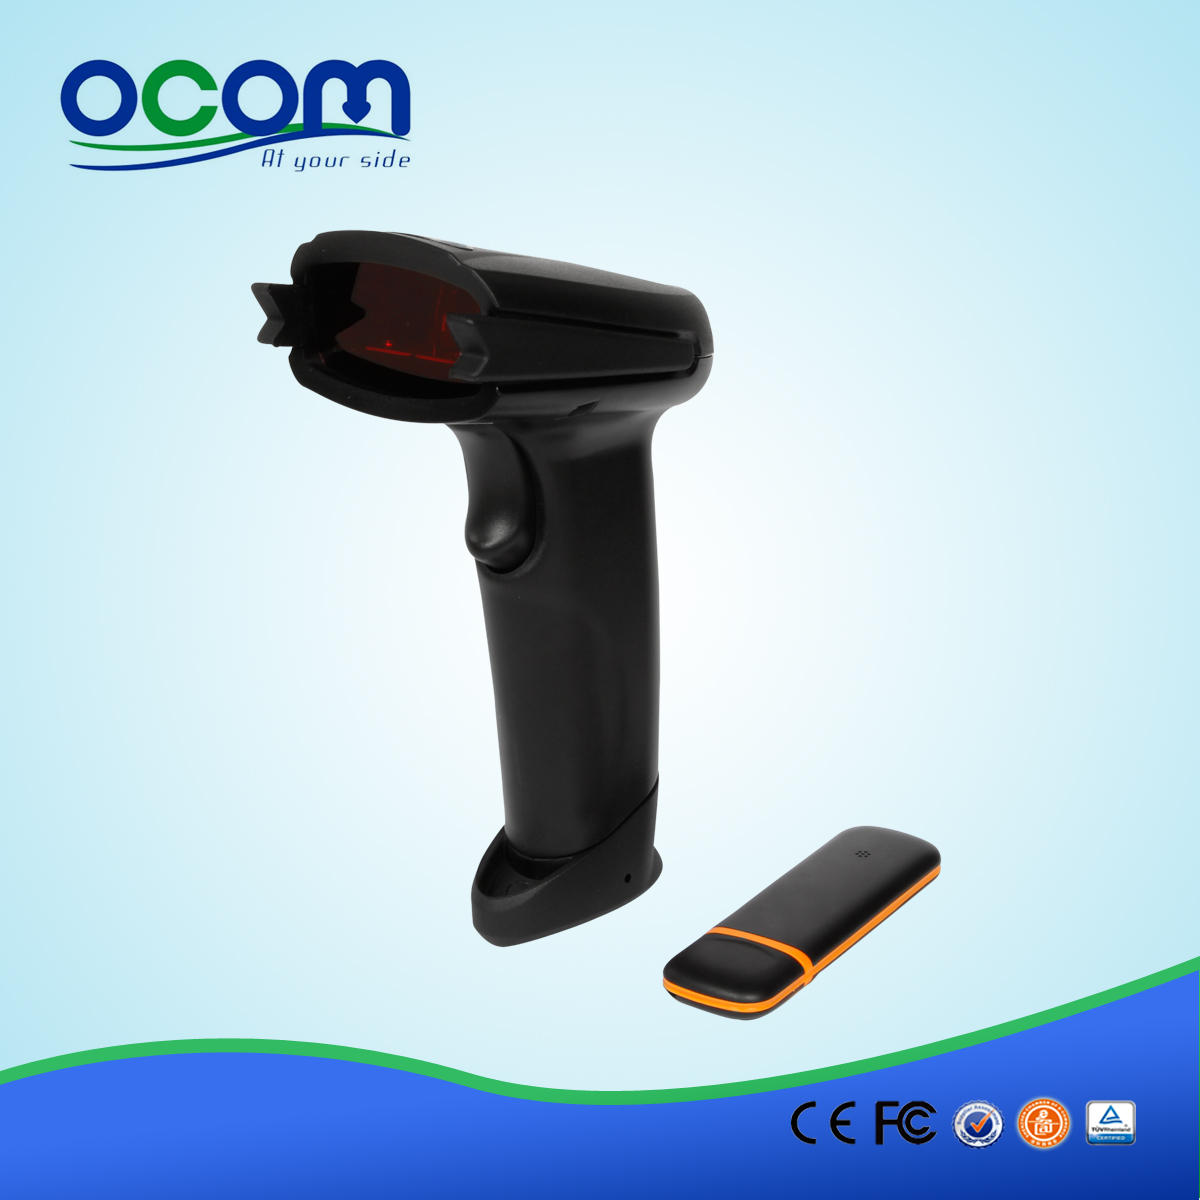 1D Bluetooth handheld wireless barcode scanner for pos system